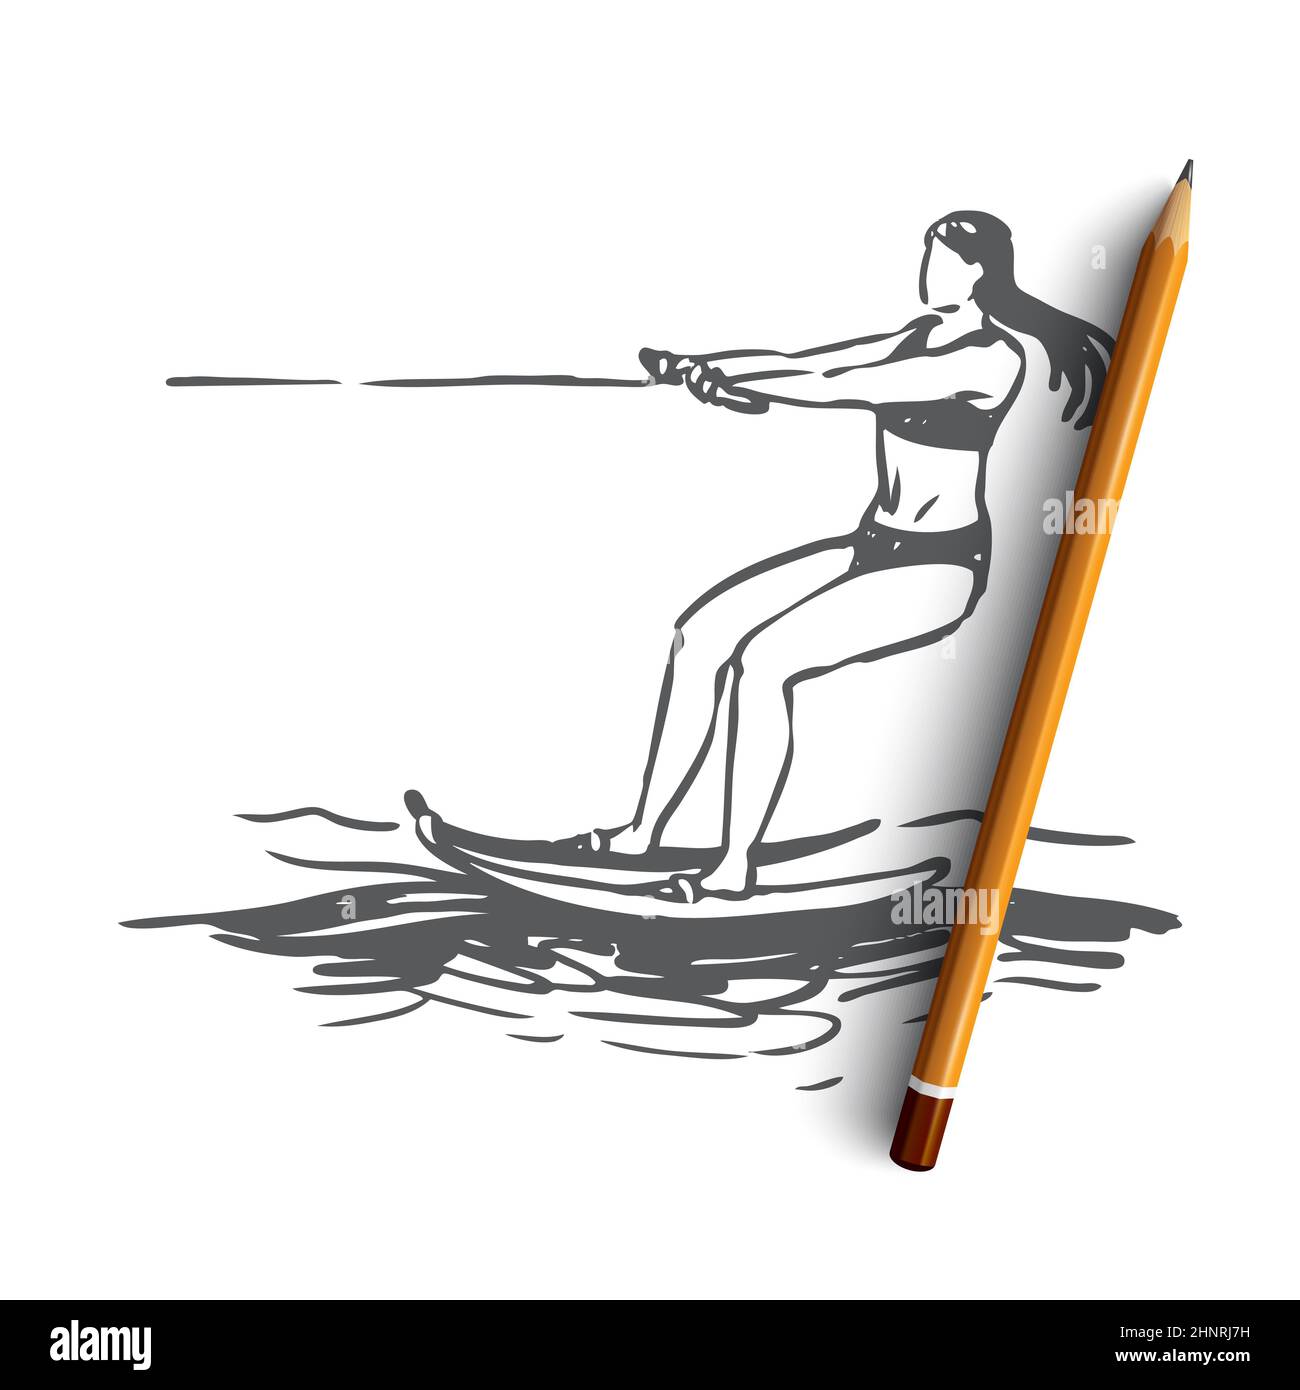 Water Skiing Sea Summer Water Activity Concept Hand Drawn Summer Sport Water Skiing Concept Sketch Isolated Vector Illustration 2HNRJ7H 